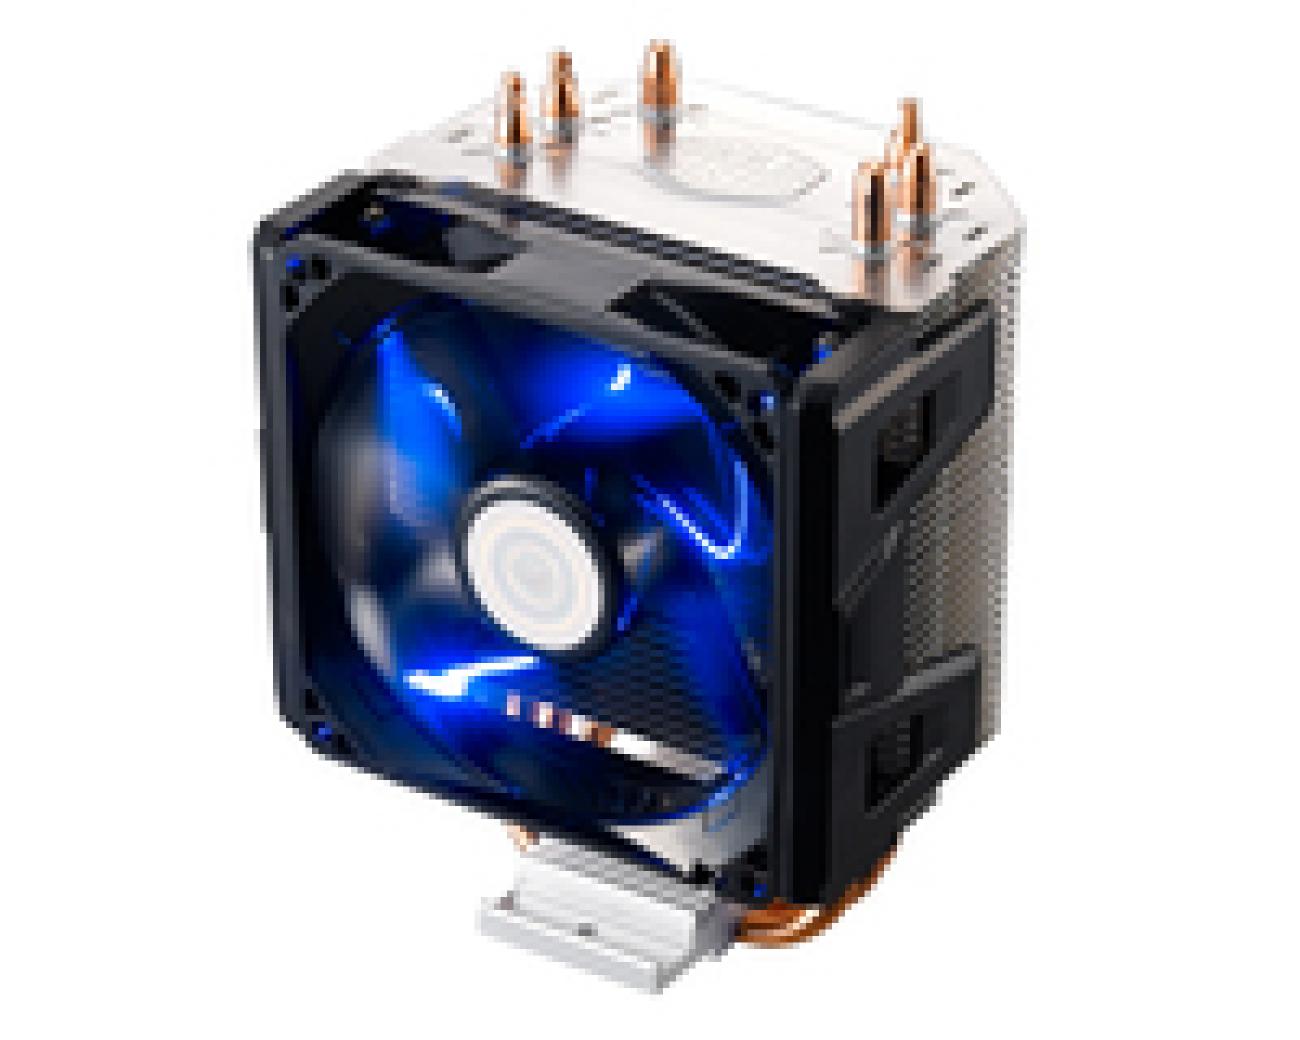 Ventola Hyper 103 Universal Tower, 3 direct contact heatpipe cooler, 92mm 800-2200RPM PWM fan